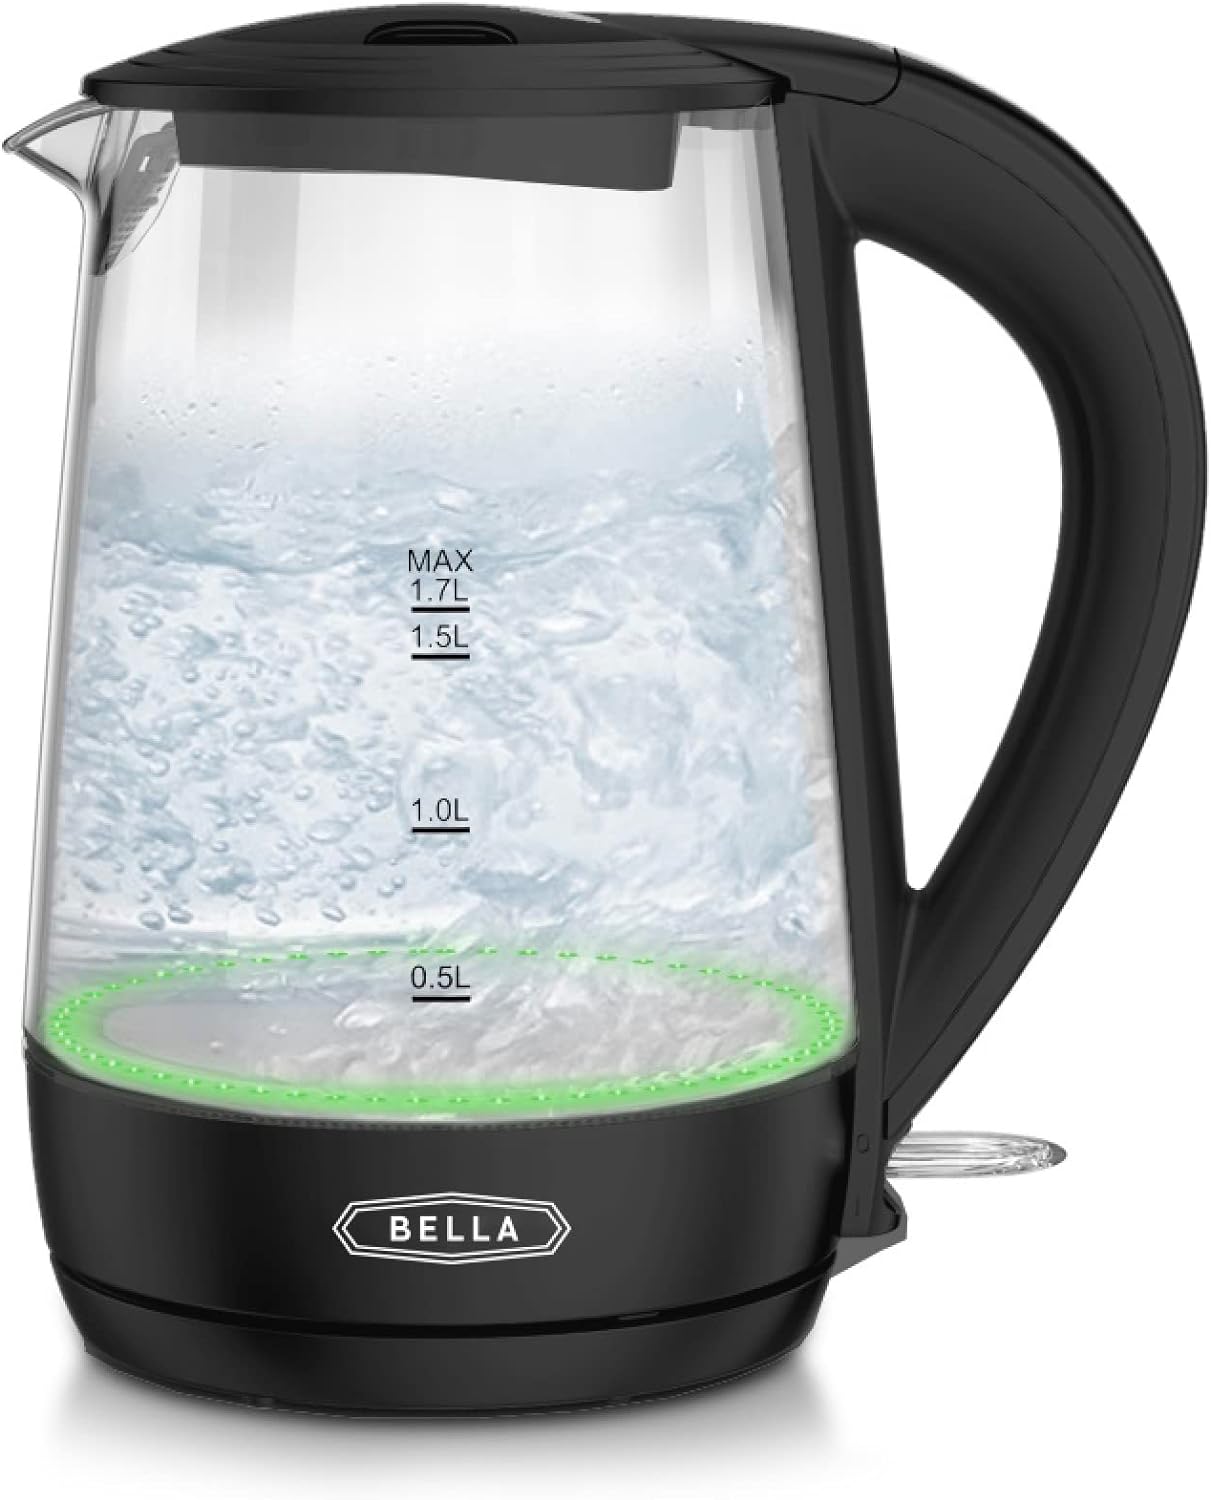 BELLA 1.7 Liter Glass Electric Kettle, Quickly Boil 7 Cups of Water in 6-7 Minutes, Soft Green LED Lights Illuminate While Boiling, Cordless Portable Water Heater, Carefree Auto Shut-Off, Black